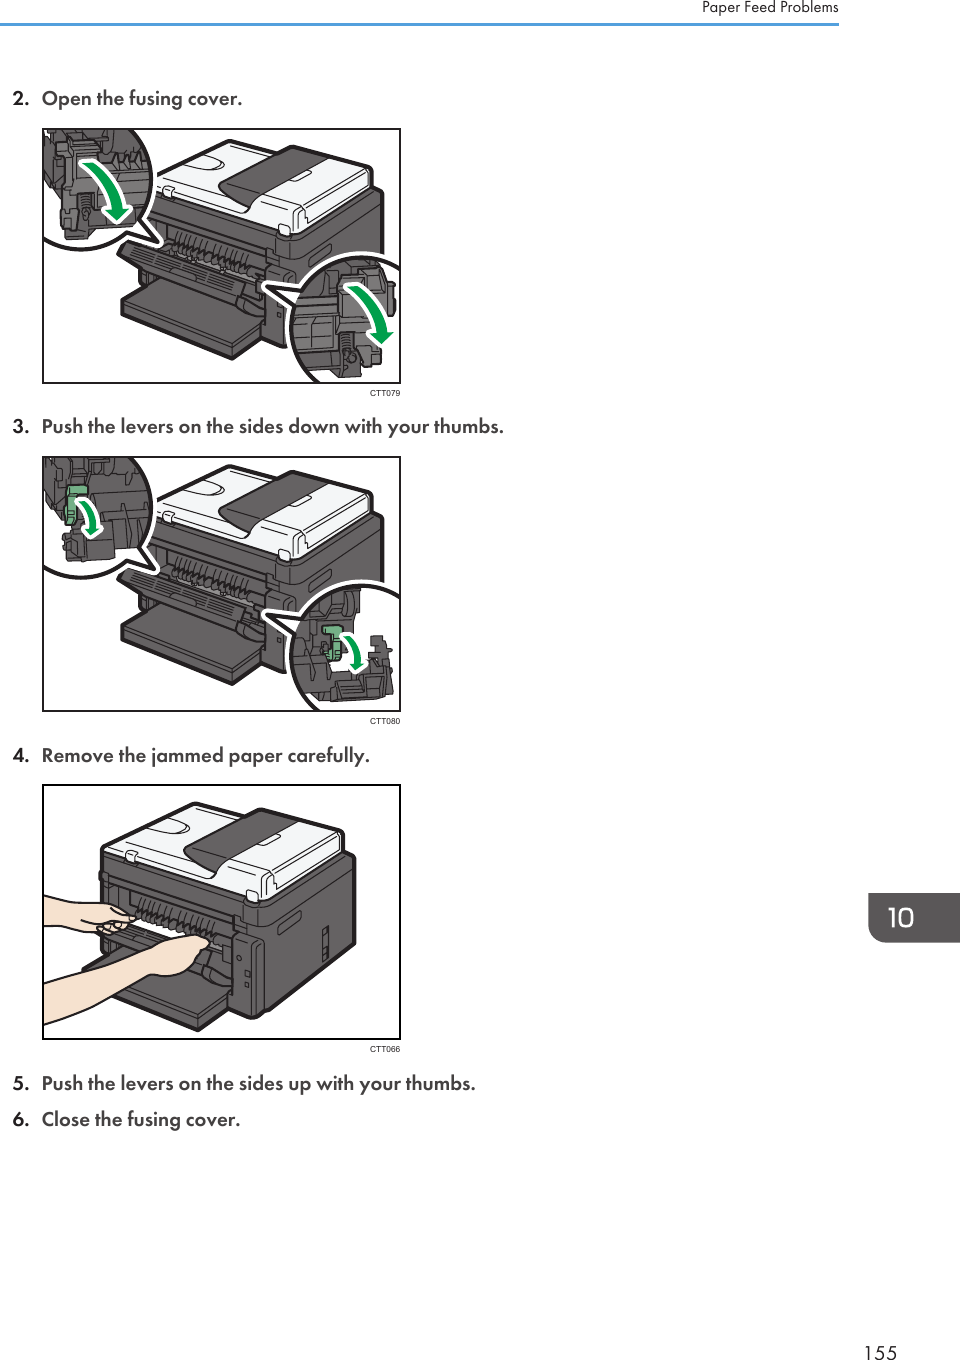 2. Open the fusing cover.CTT0793. Push the levers on the sides down with your thumbs.CTT0804. Remove the jammed paper carefully.CTT0665. Push the levers on the sides up with your thumbs.6. Close the fusing cover.Paper Feed Problems155